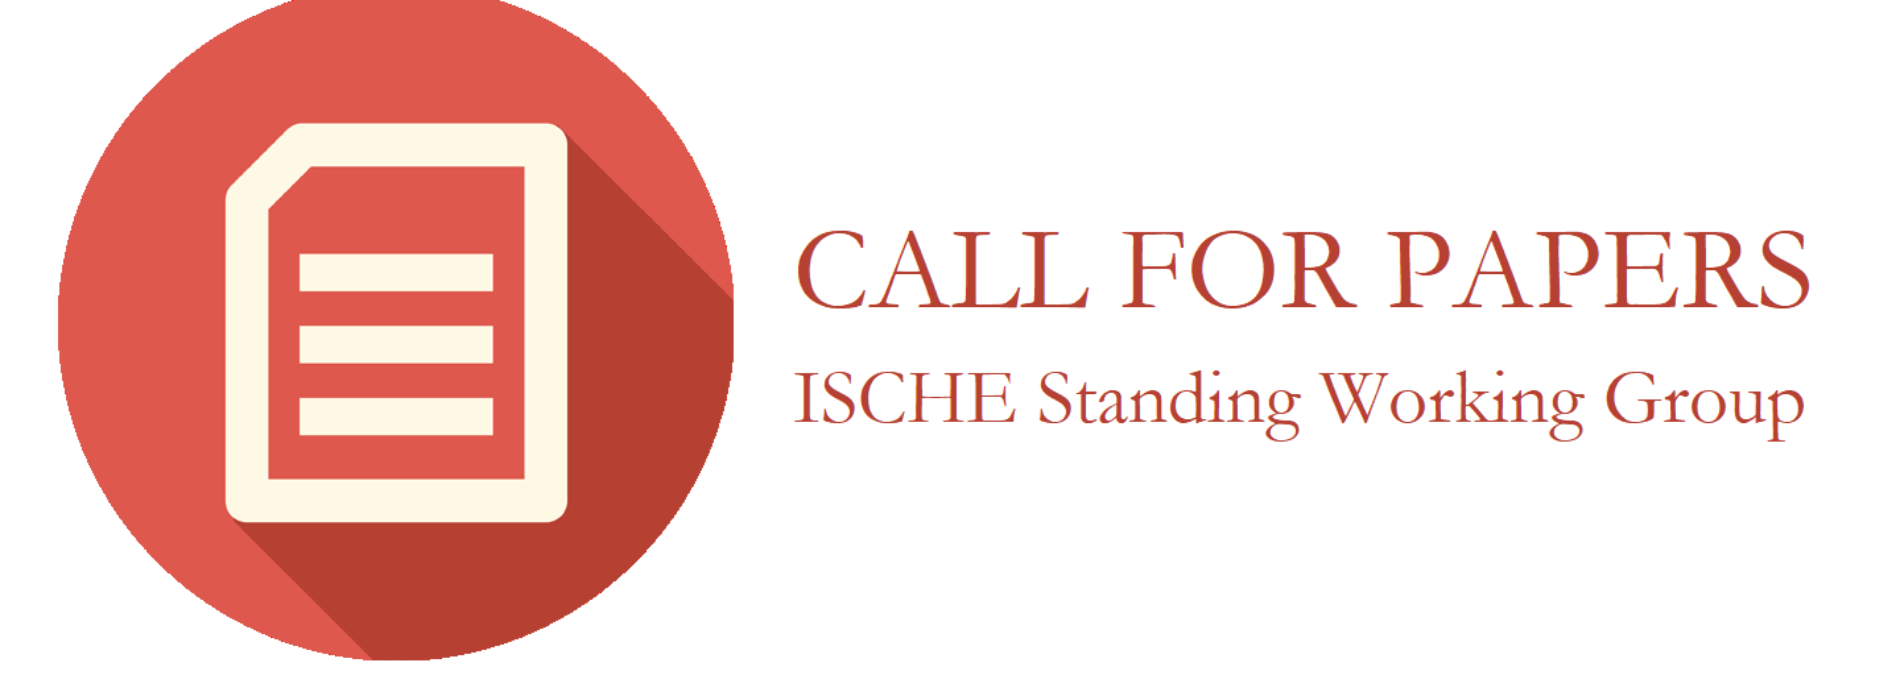 Migrants, migration and Education SWG invites submissions to ISCHE 40 Conference. Deadline: Jan. 31, 2018